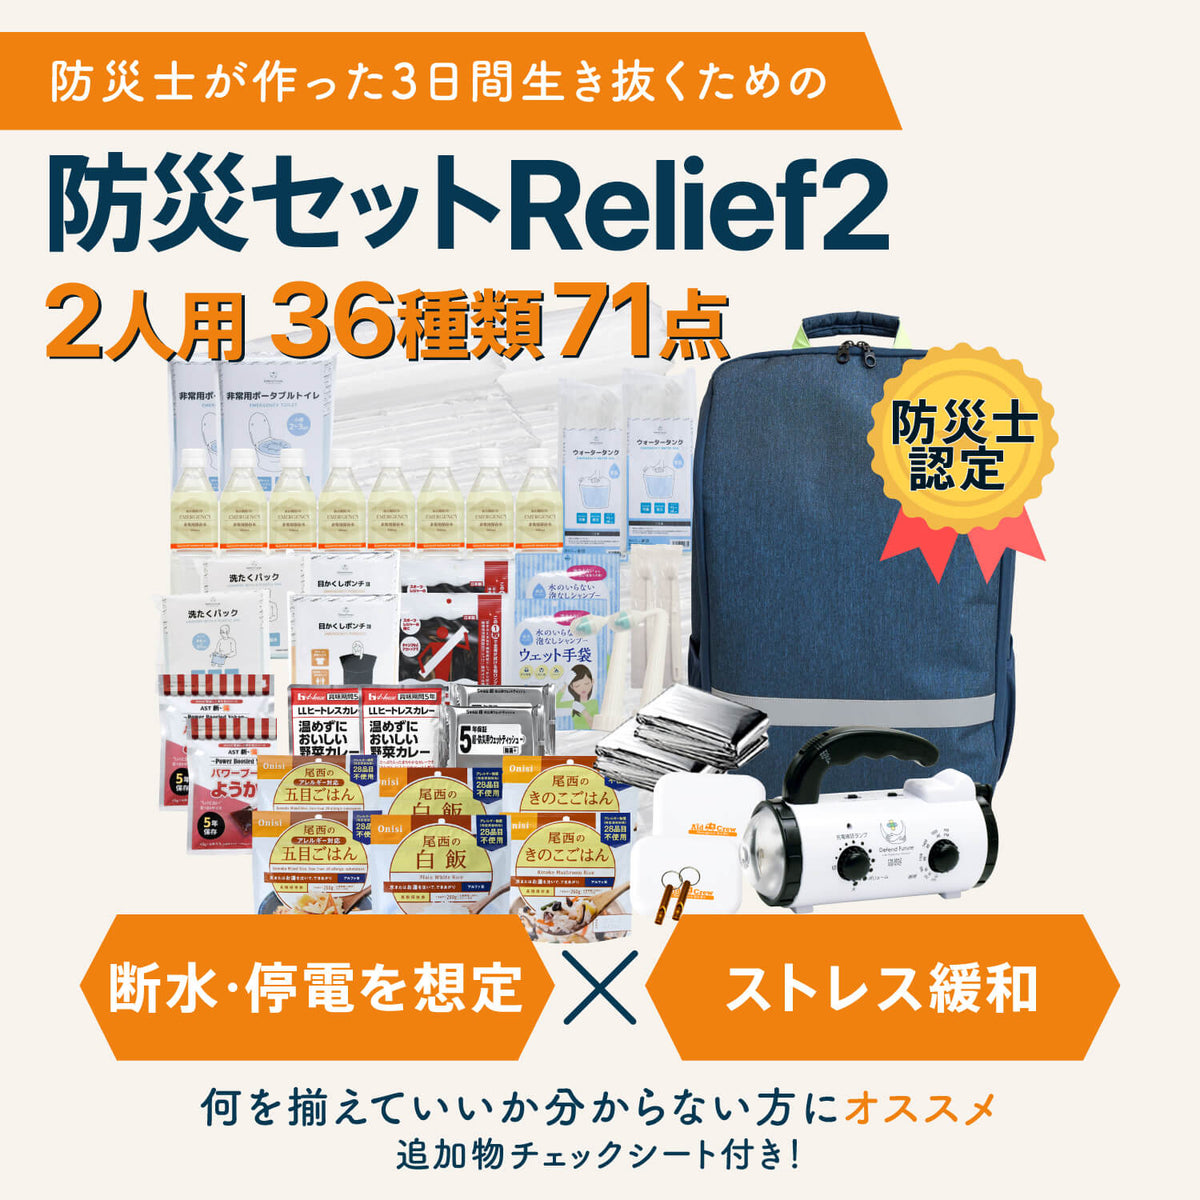 Defend Future 防災セット2人用Relief2 – Defend Future 公式 